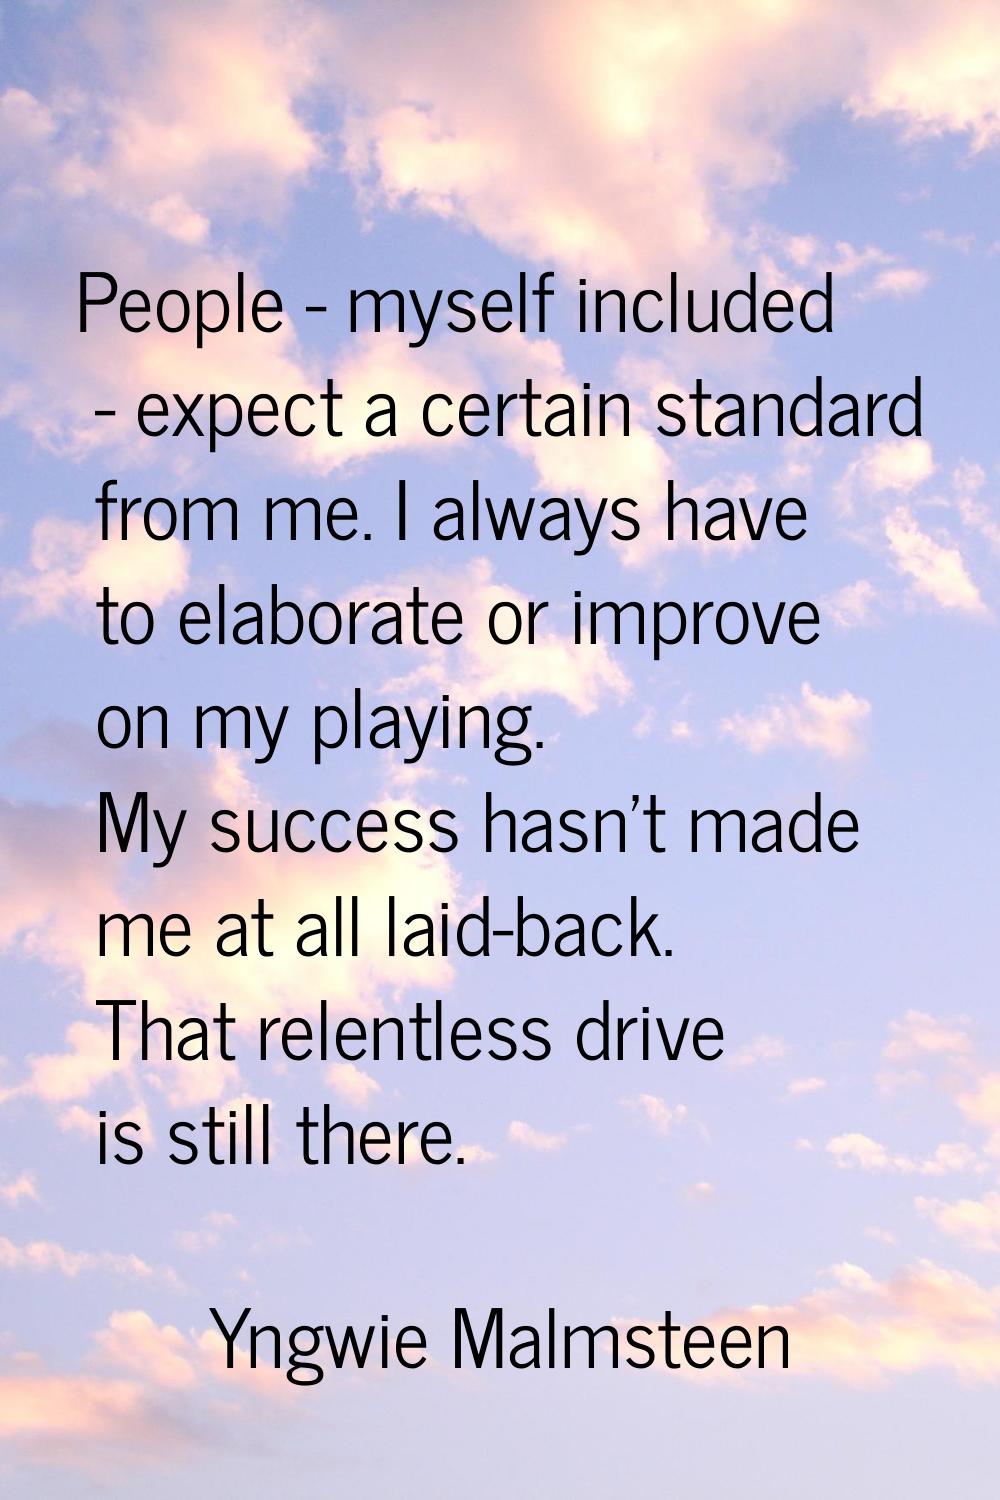 People - myself included - expect a certain standard from me. I always have to elaborate or improve